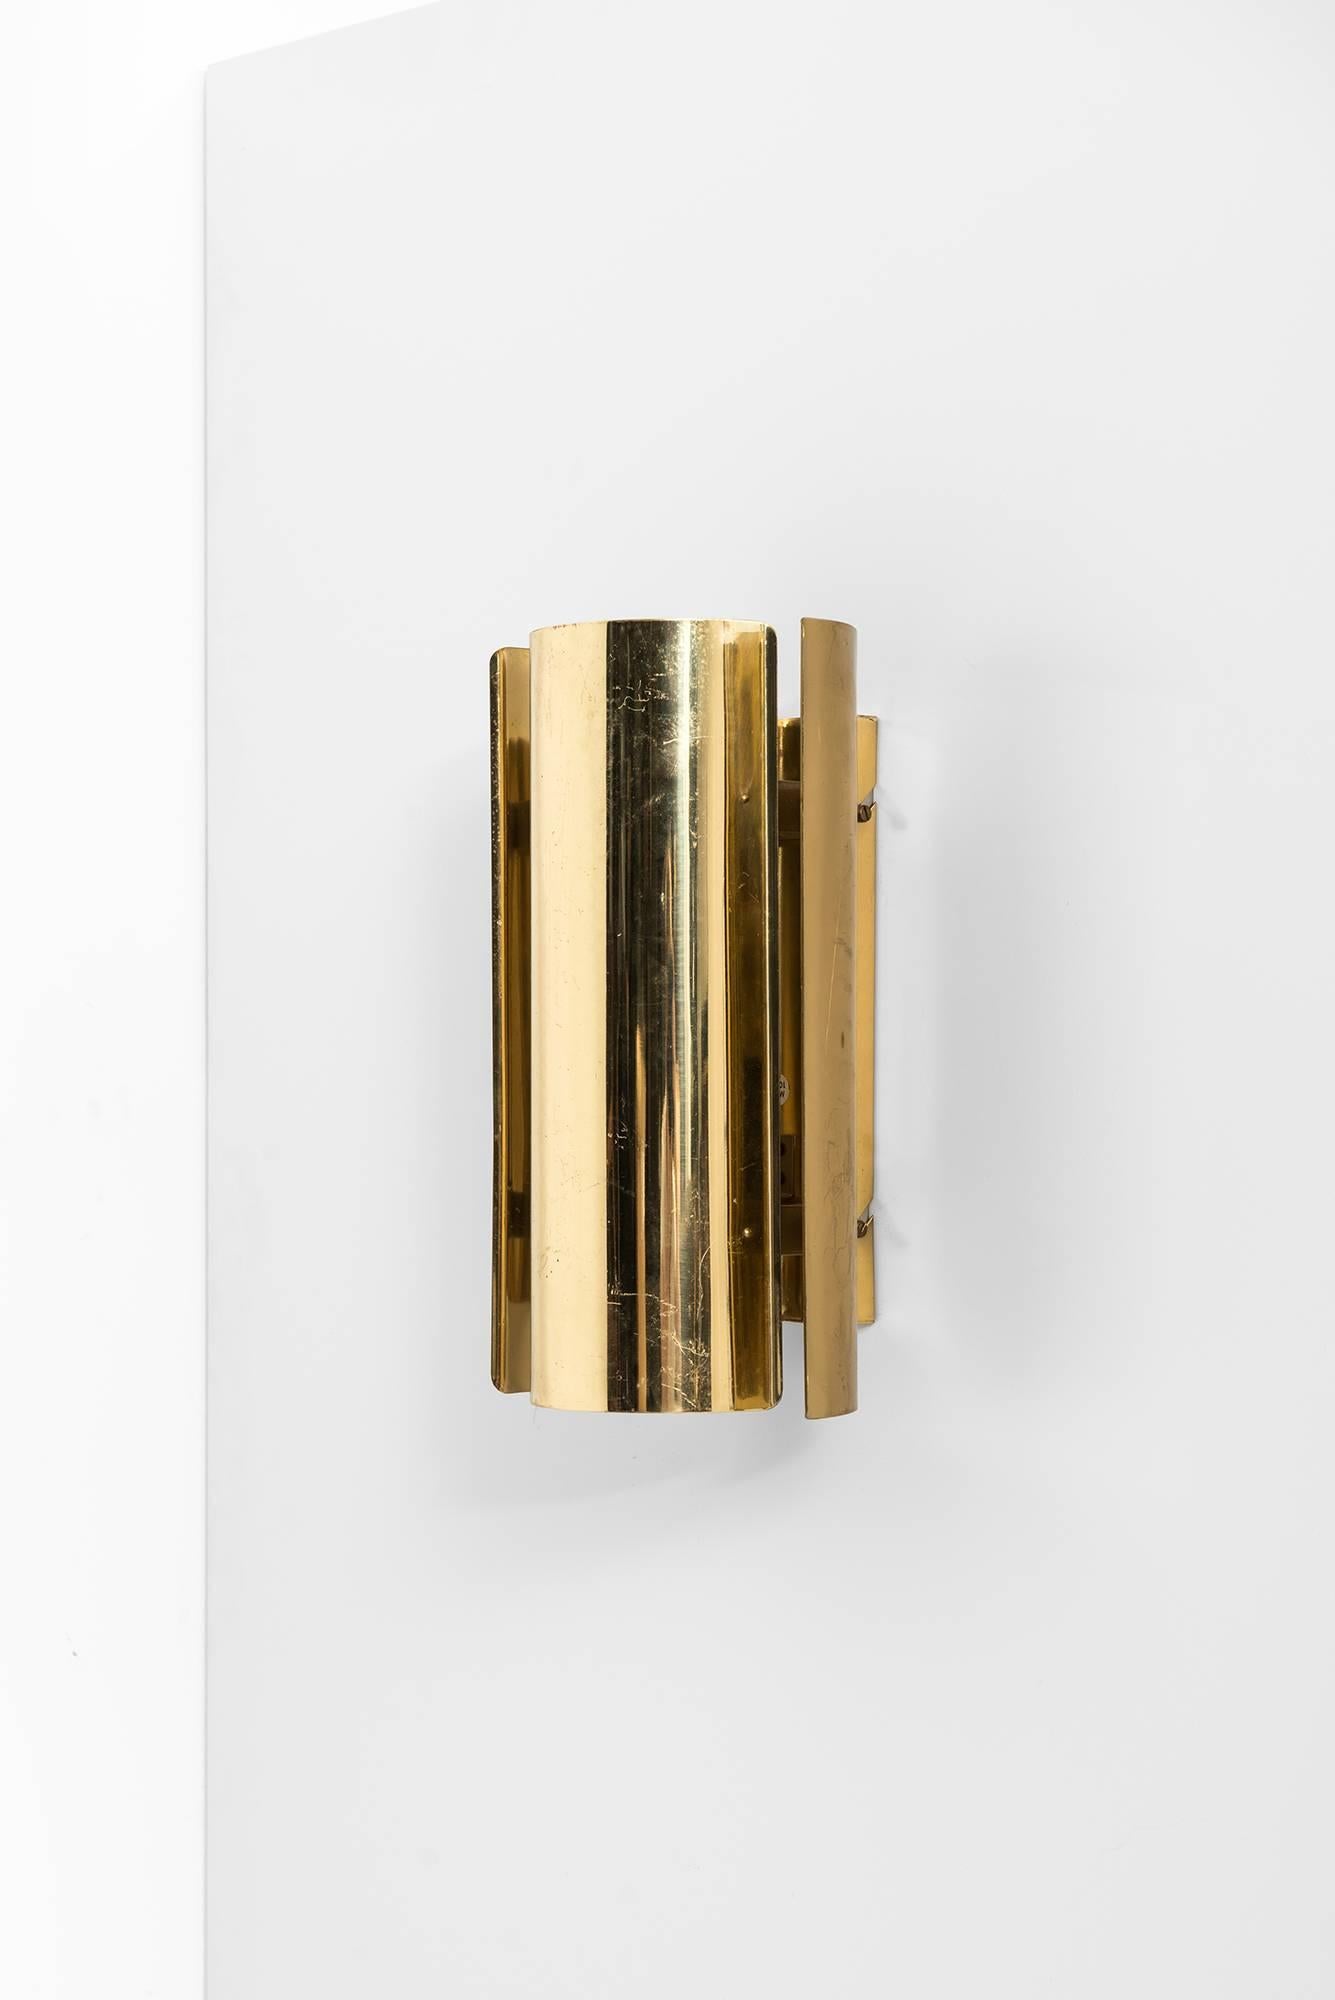 Rare wall lamps in brass. Produced by Falkenbergs belysnings AB in Sweden.